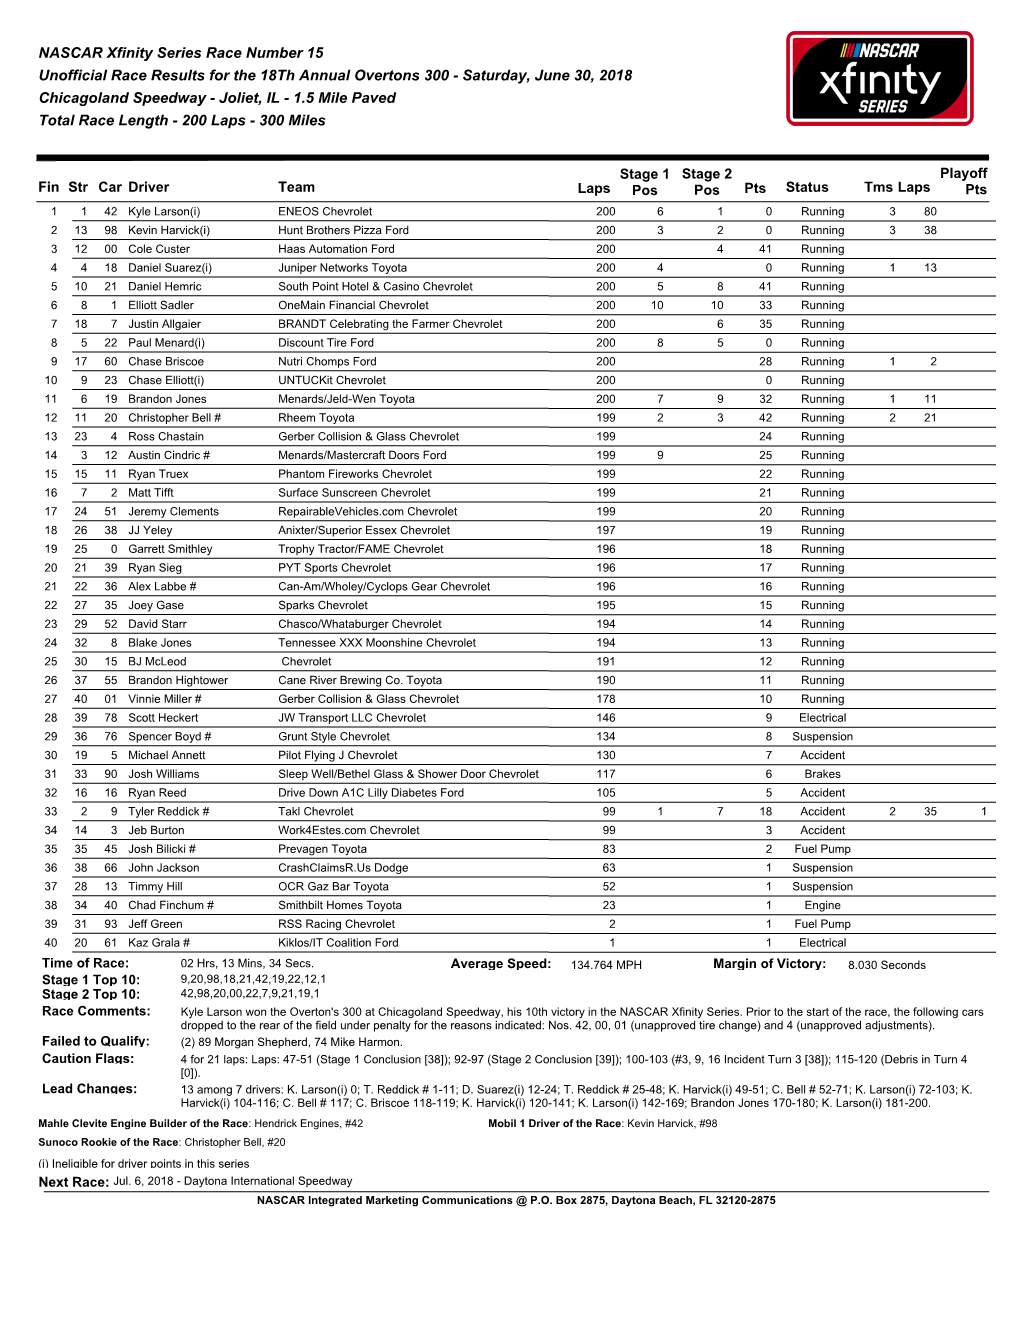 NASCAR Xfinity Series Race Number 15 Unofficial Race Results for The